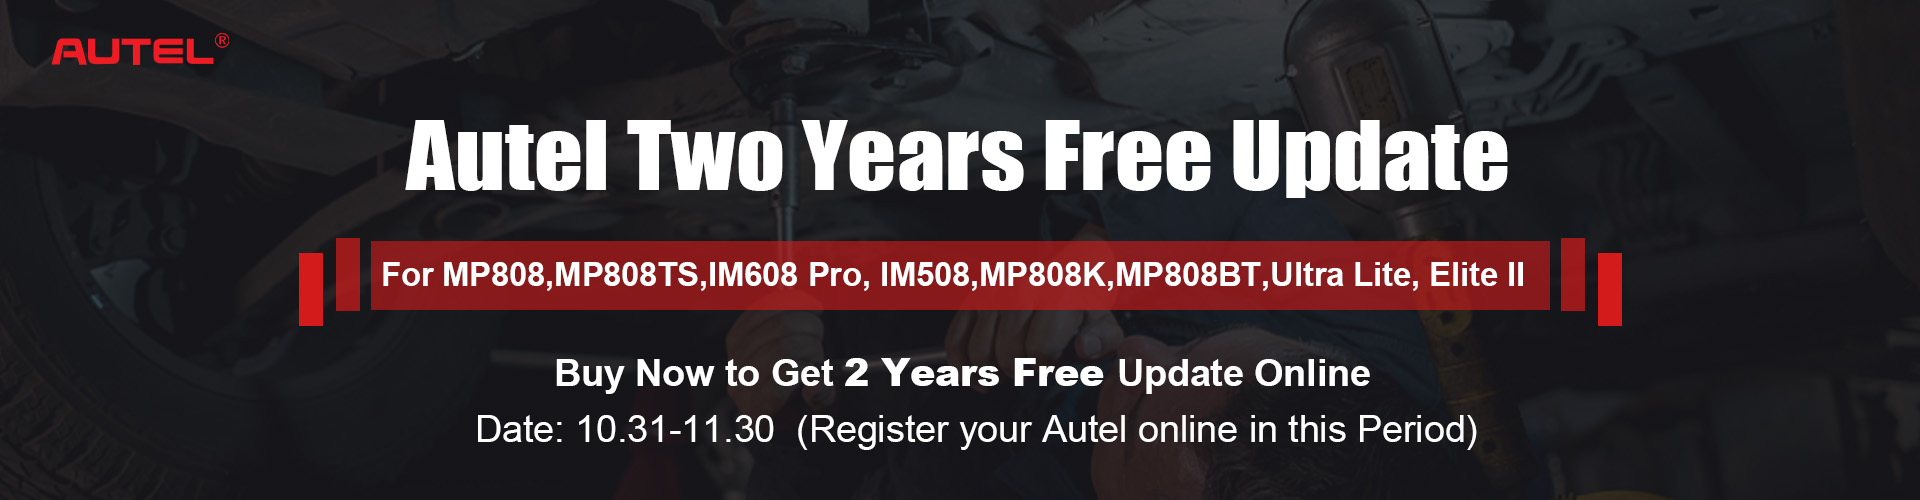 Autel Two Years Free Update